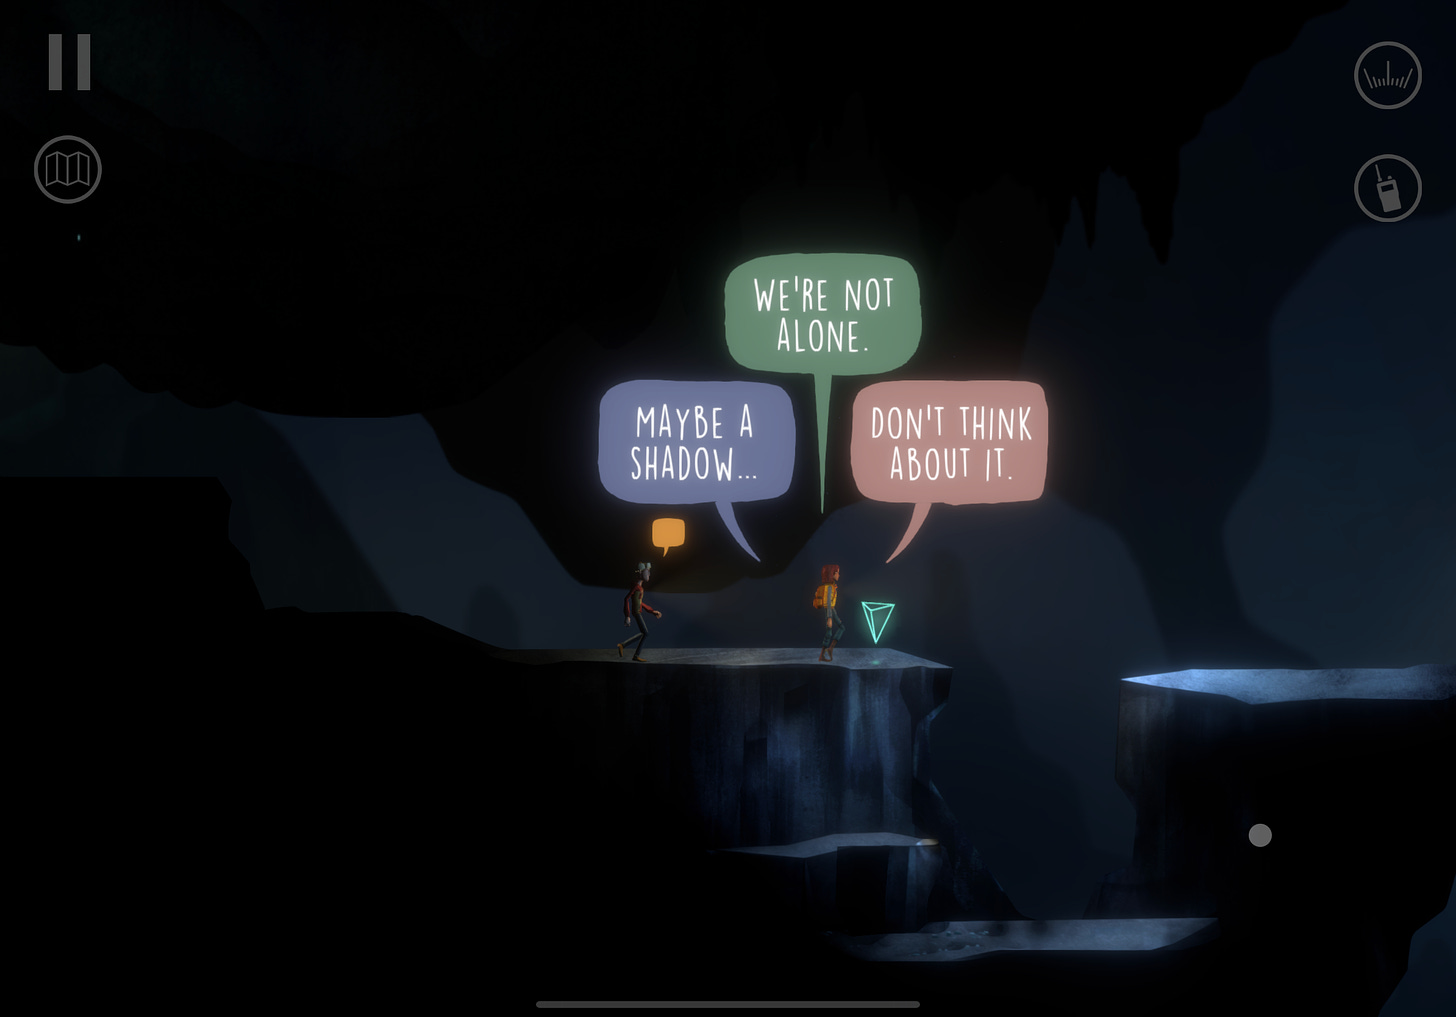 Two characters in caves. Three speech bubbles: "Maybe a shadow", "We're not alone", "Don't think about it"